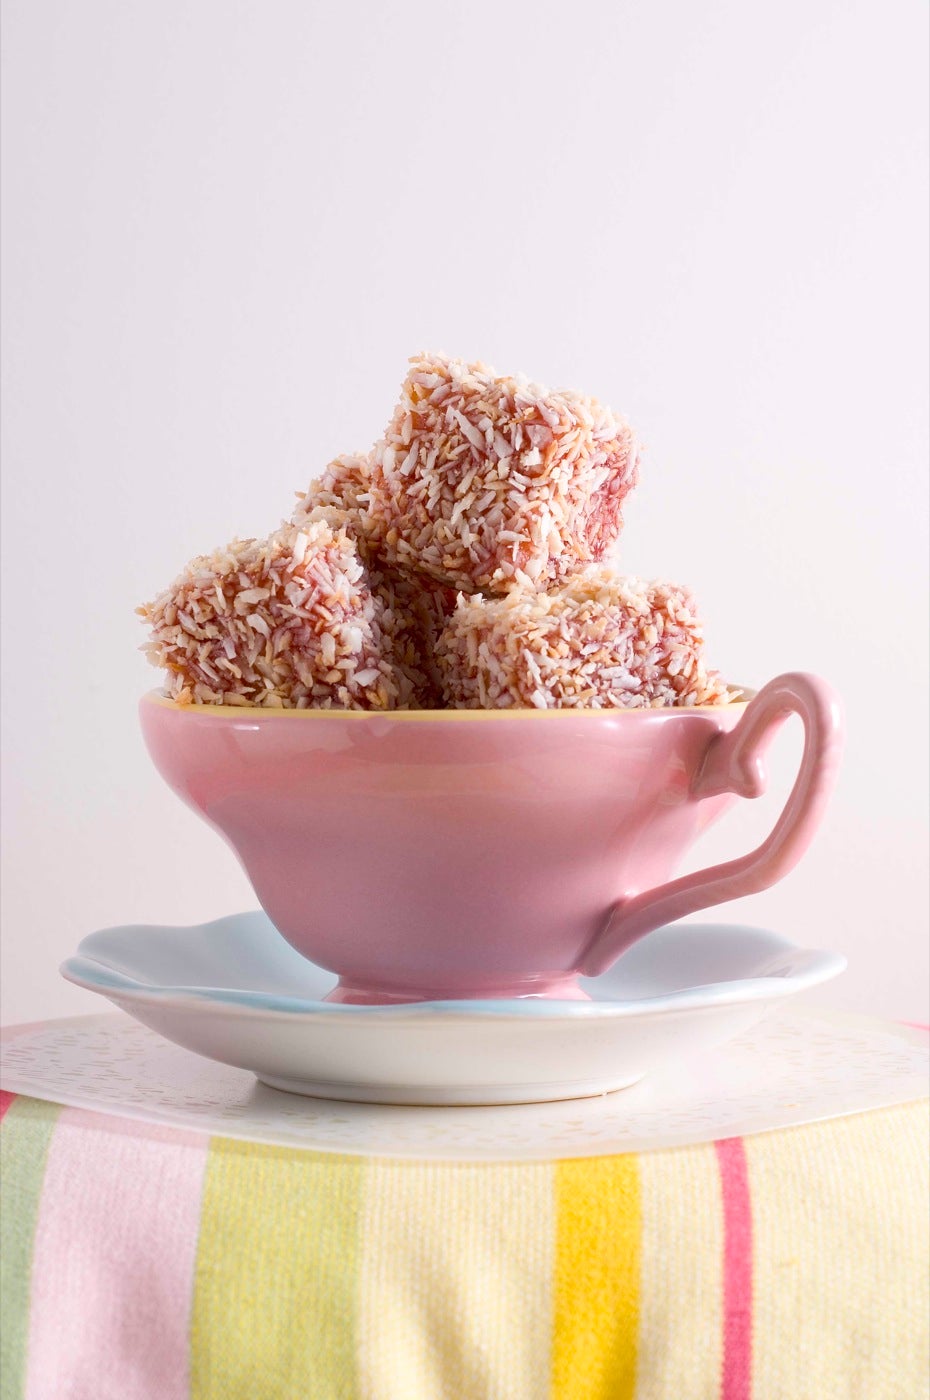 Lamingtons - Wholesome Patisserie